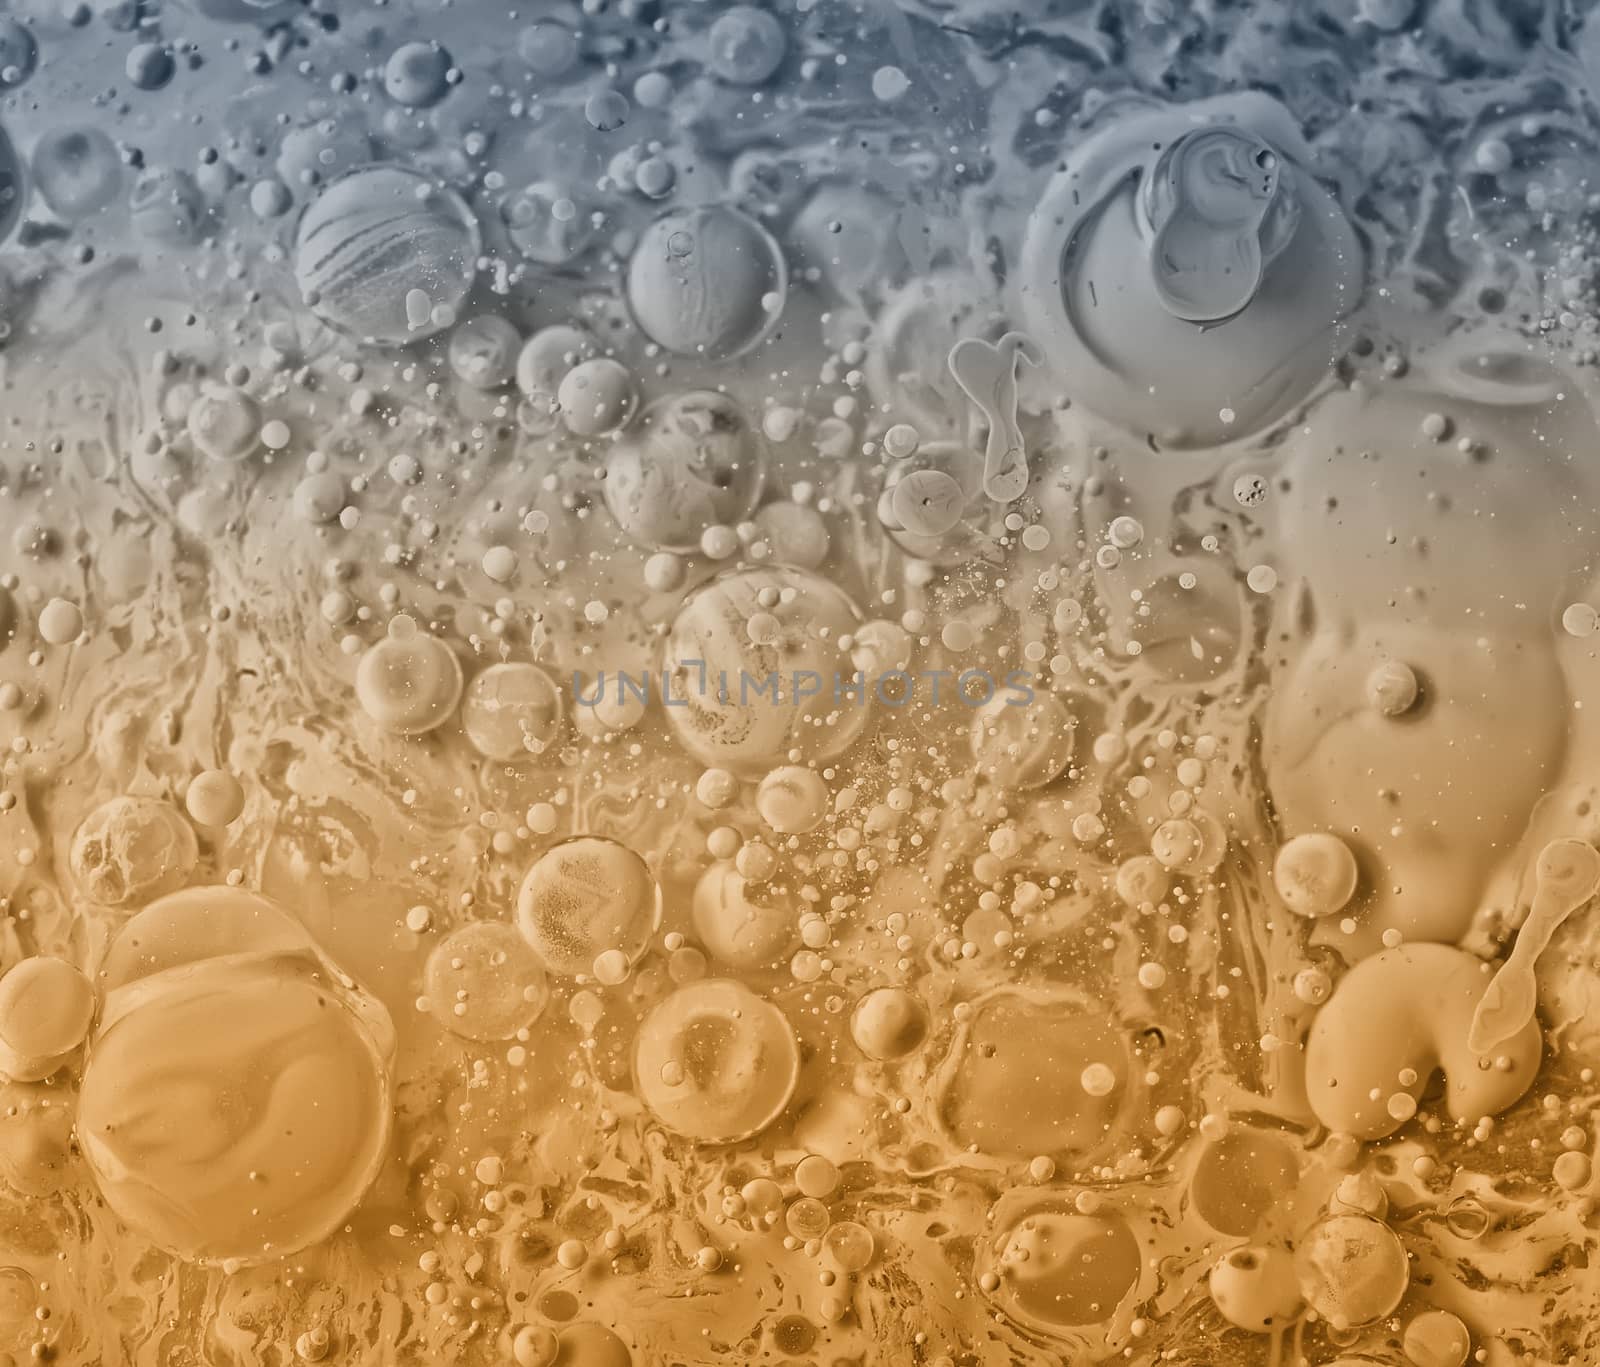 Gray and Orange Abstract Liquid and Color in Various Forms, Shapes Background by Charidy